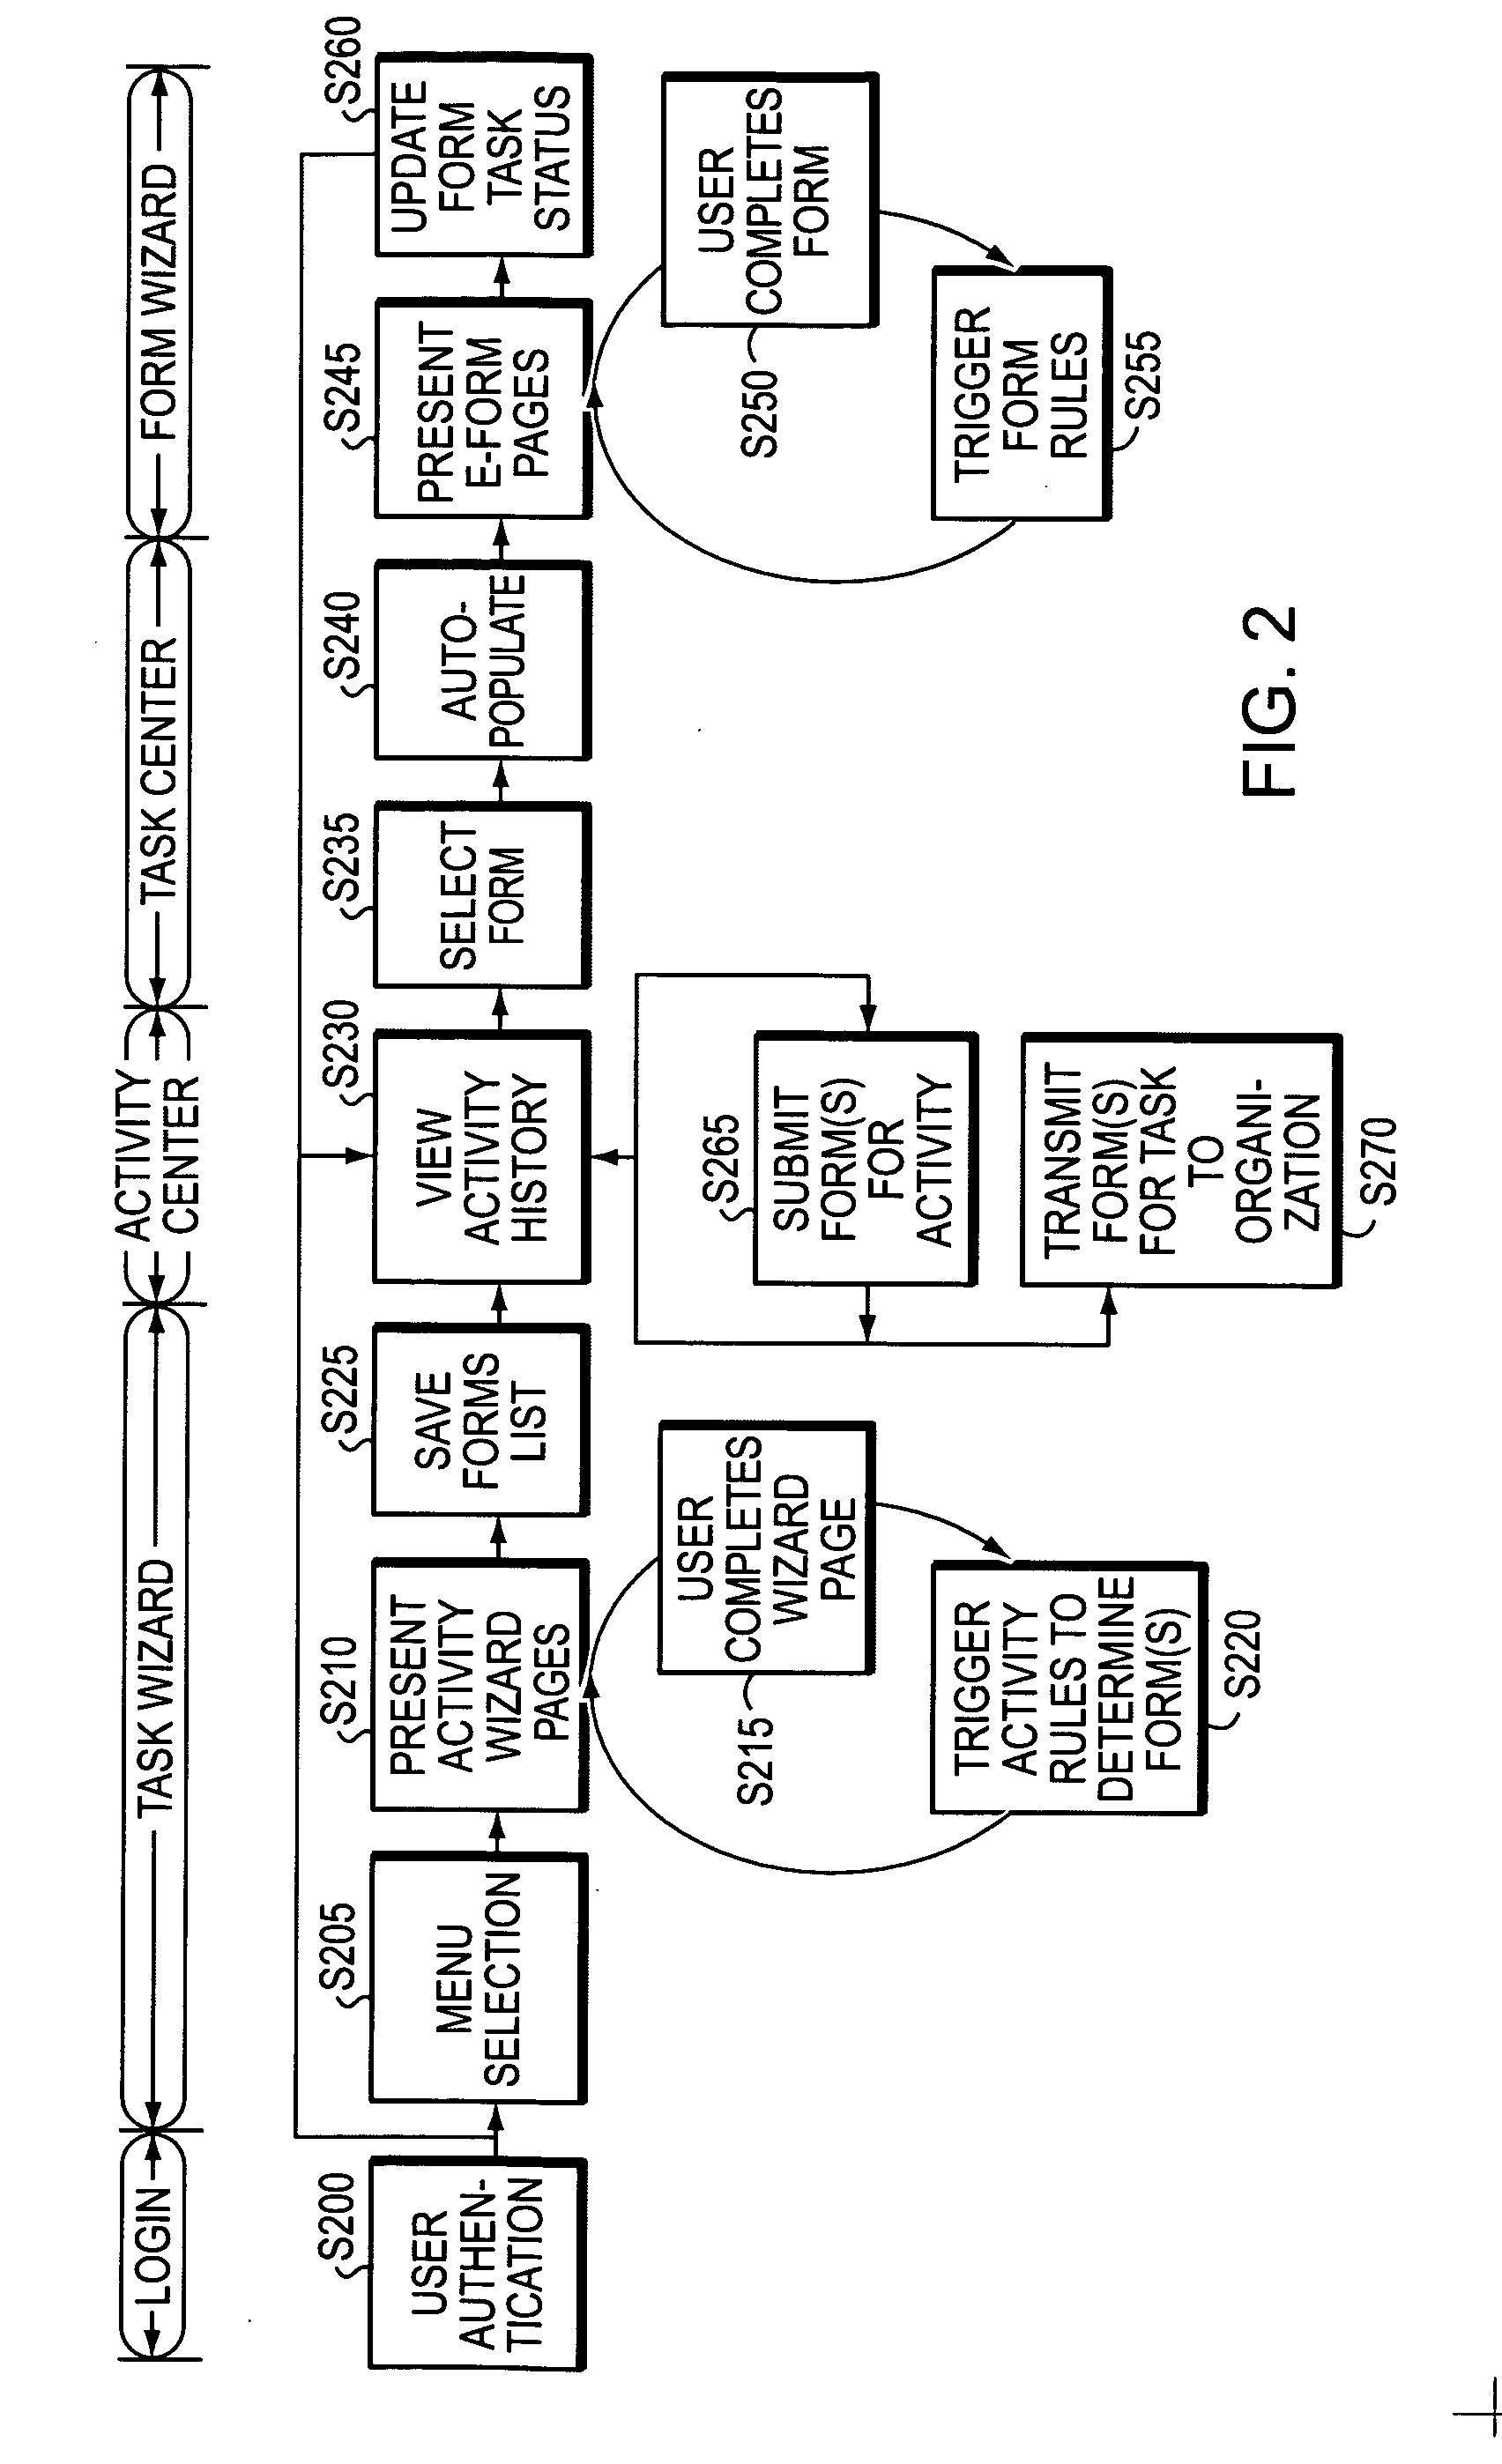 System for assisting user with task involving form, and related apparatuses, methods, and computer-readable media